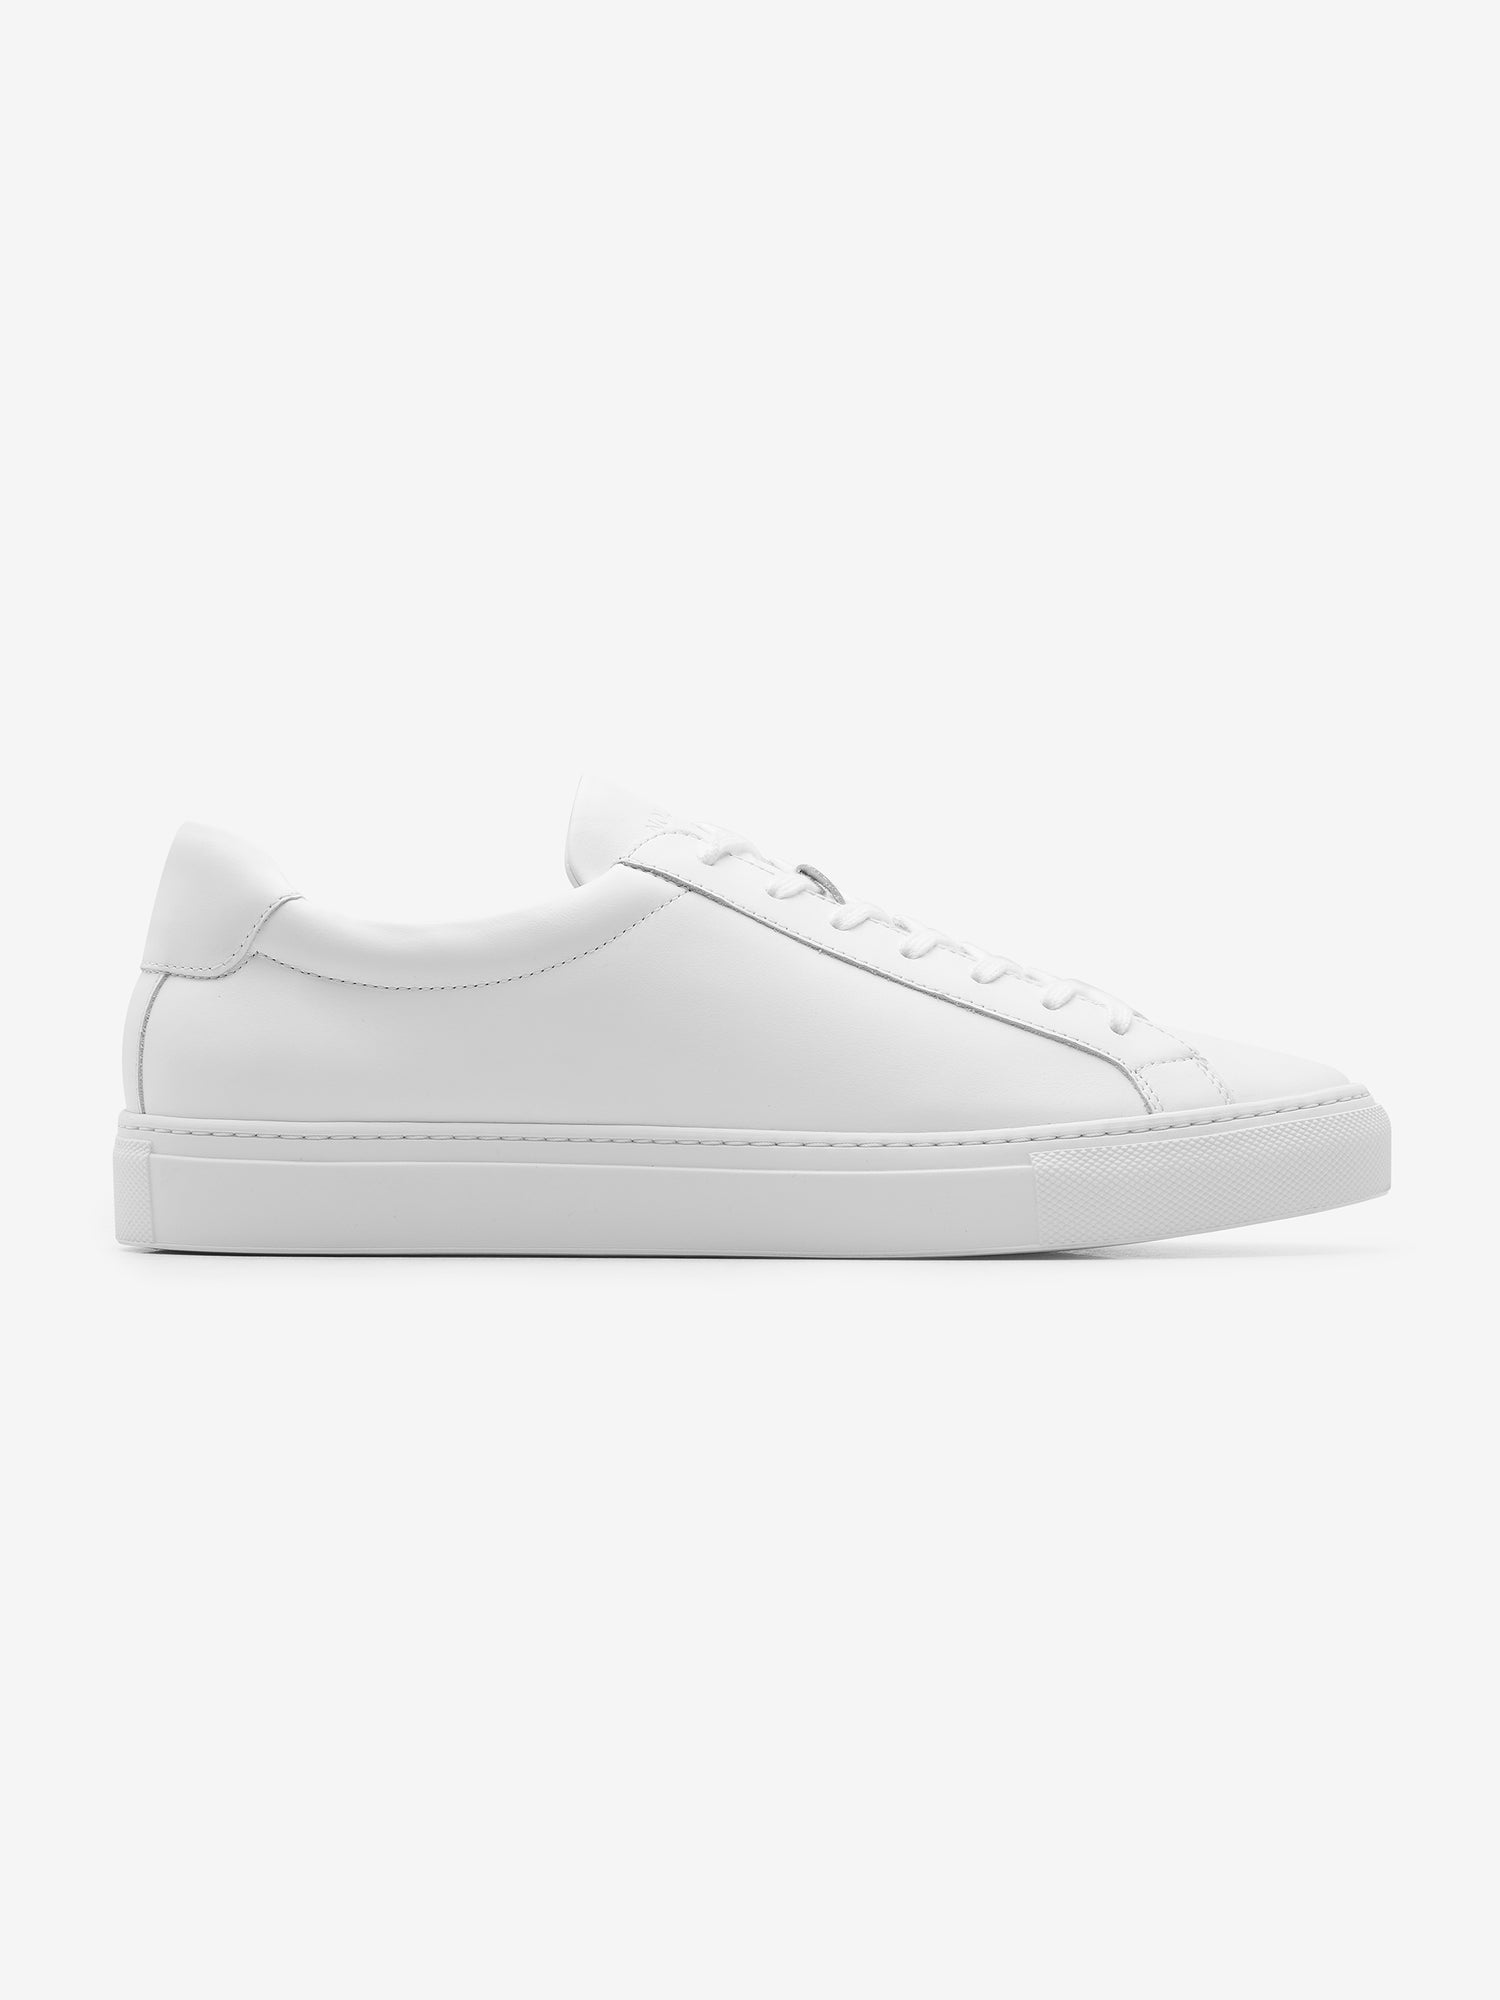 Dundee Leather FW00070-WHT